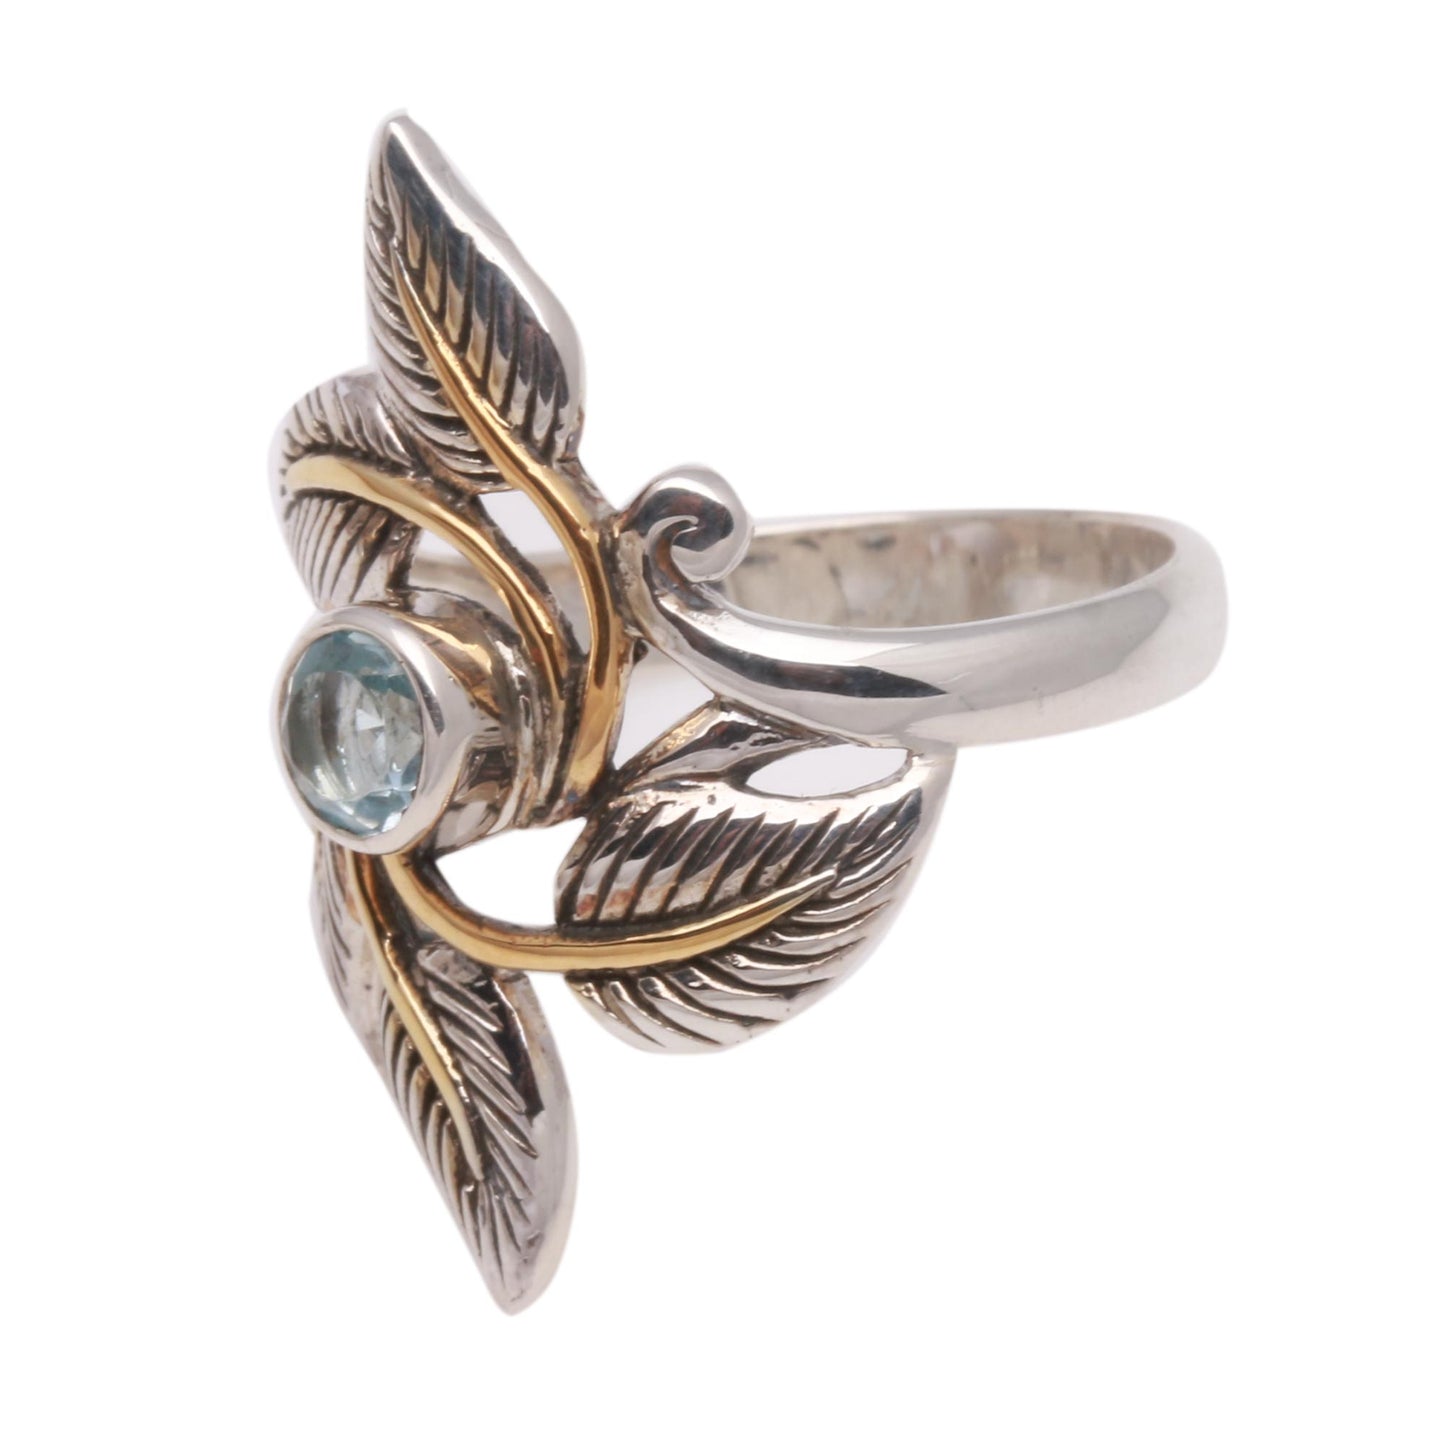 Wreathed in Leaves Leafy Gold-Accented Blue Topaz Cocktail Ring from Bali